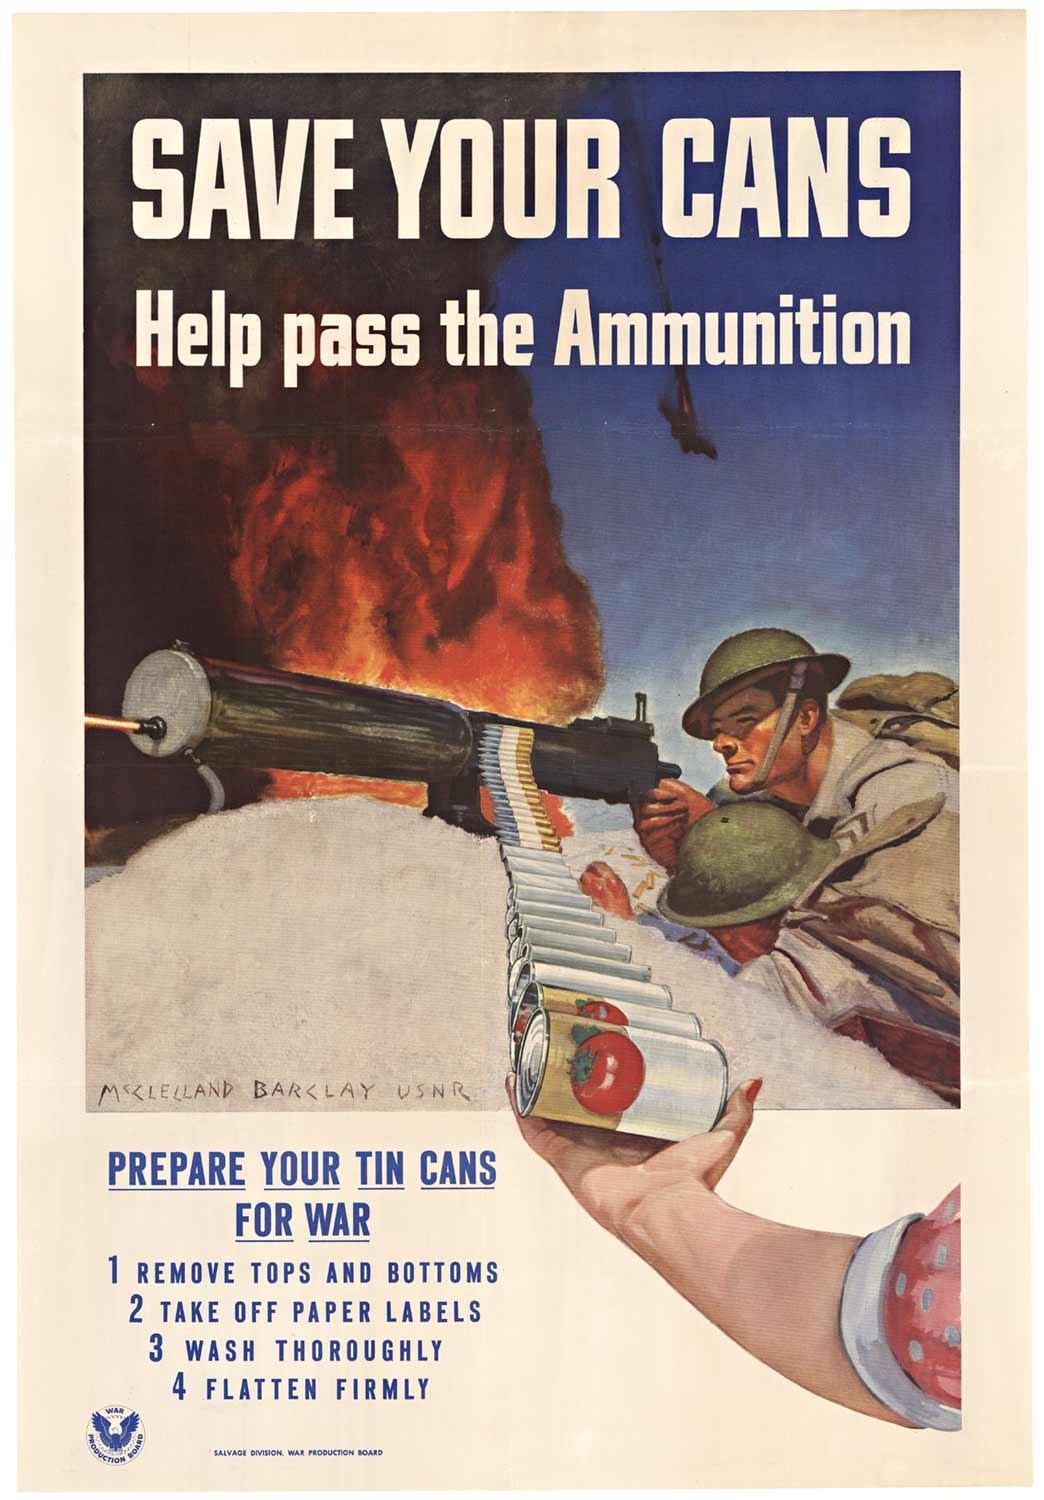 Original "Save Your Cans, Help pass the Ammunition" vintage military poster 